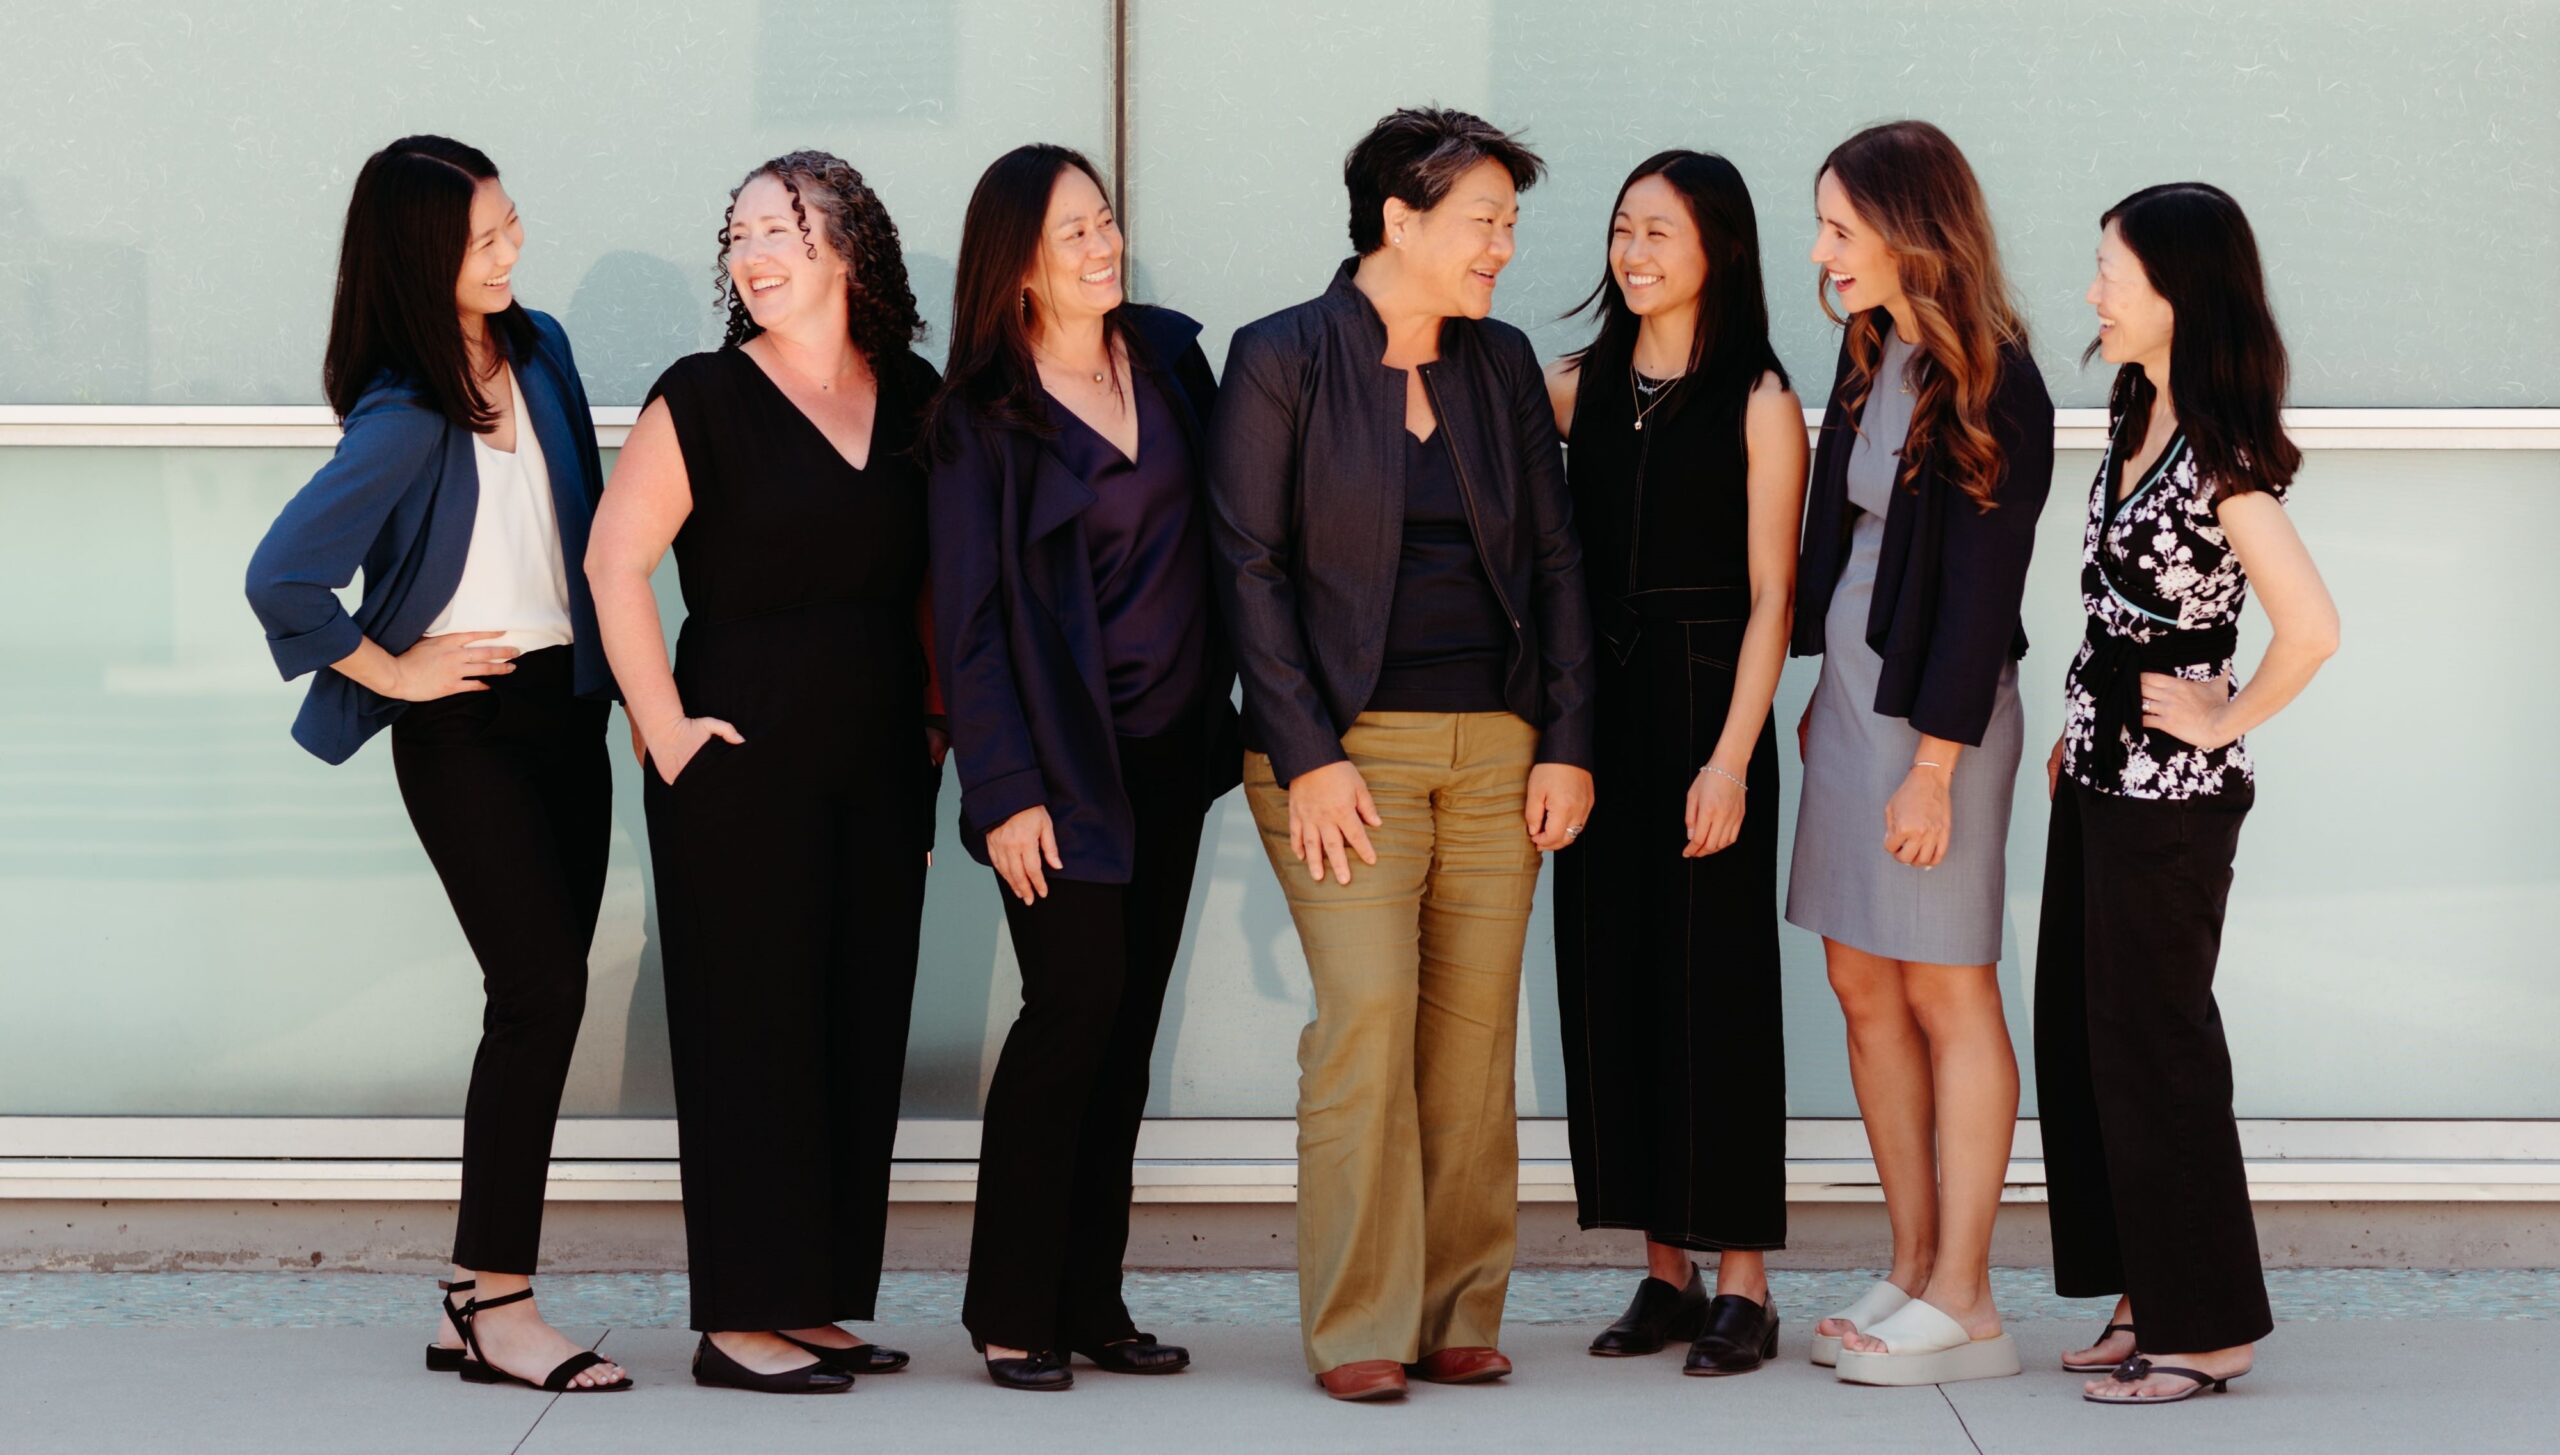 Seven women smiling and laughing